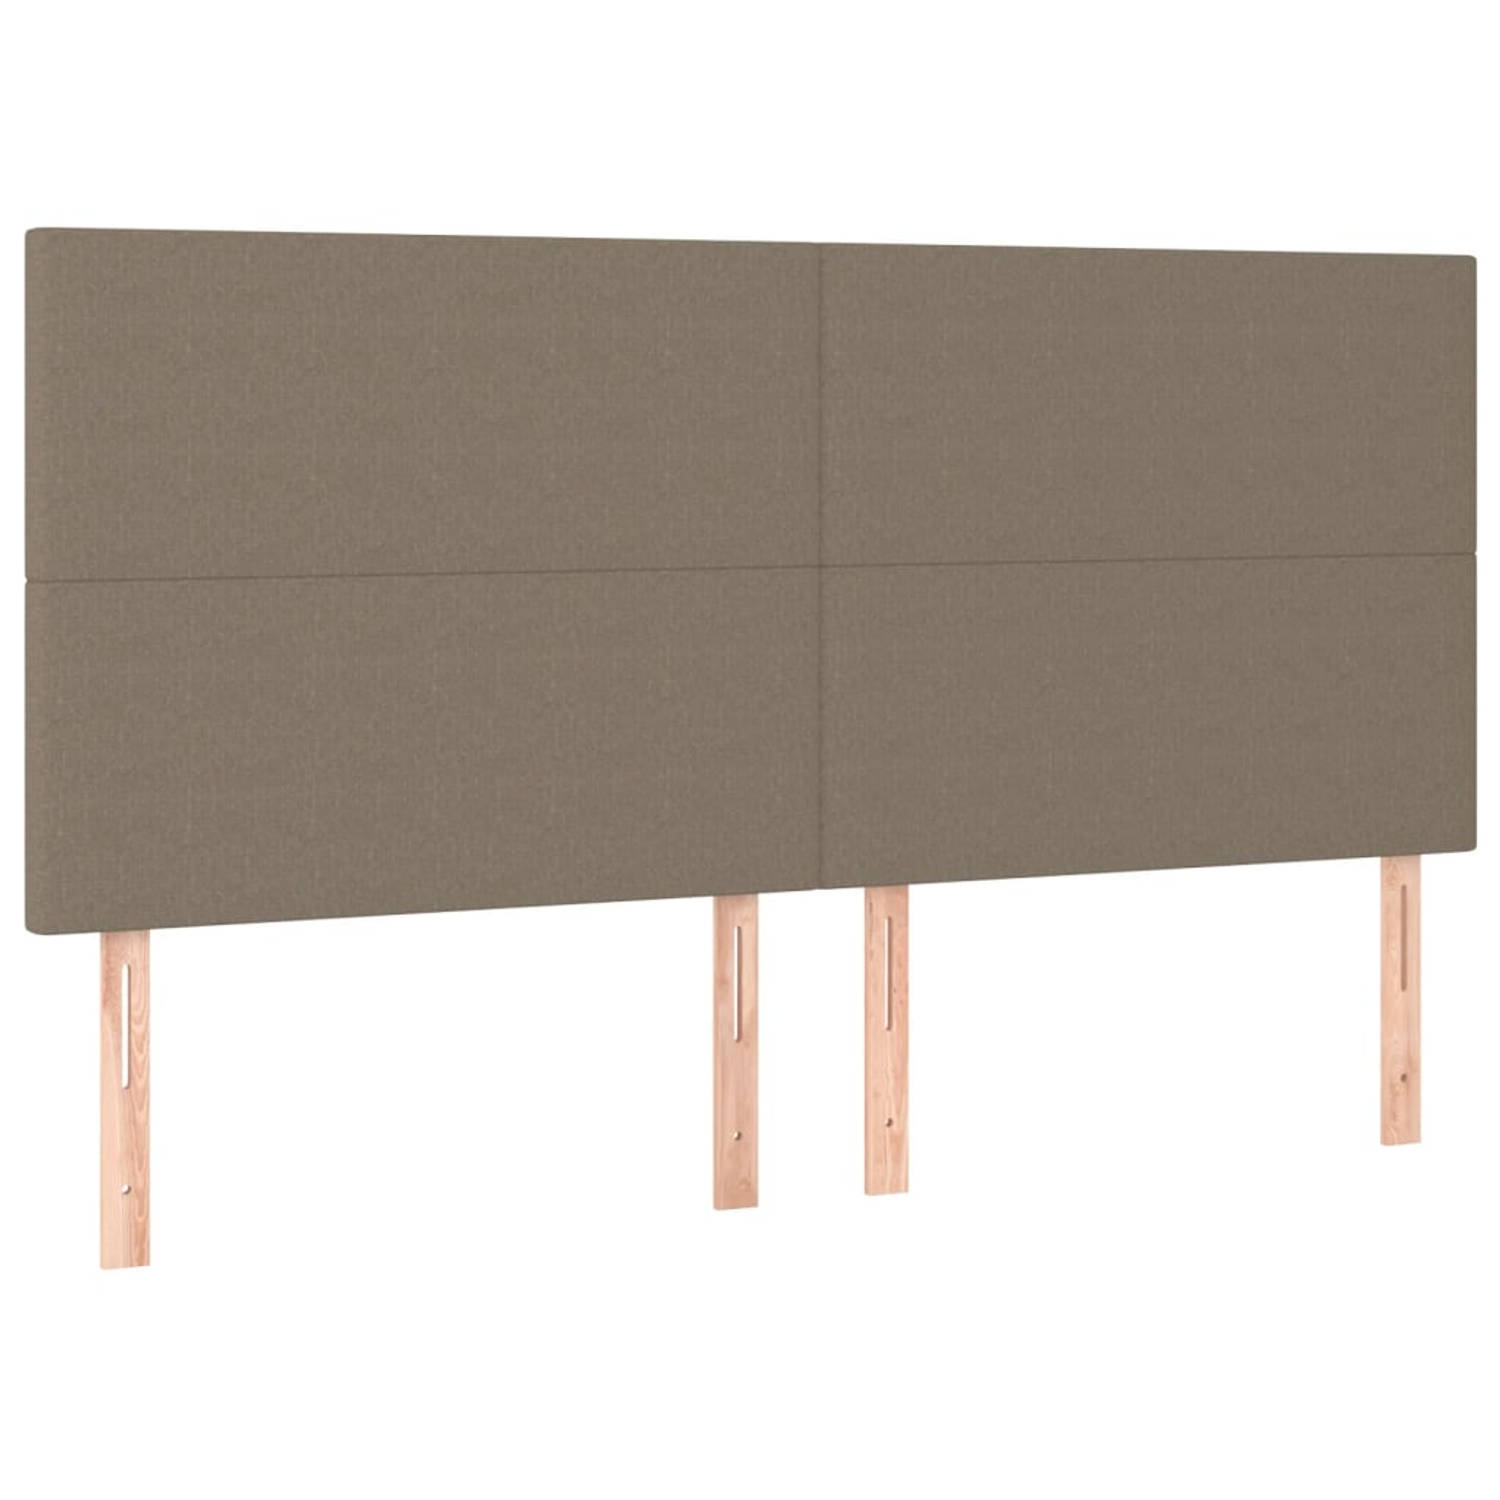 The Living Store Hoofdeind Bedaccessoires - 160 x 5 x 118/128 cm - taupe